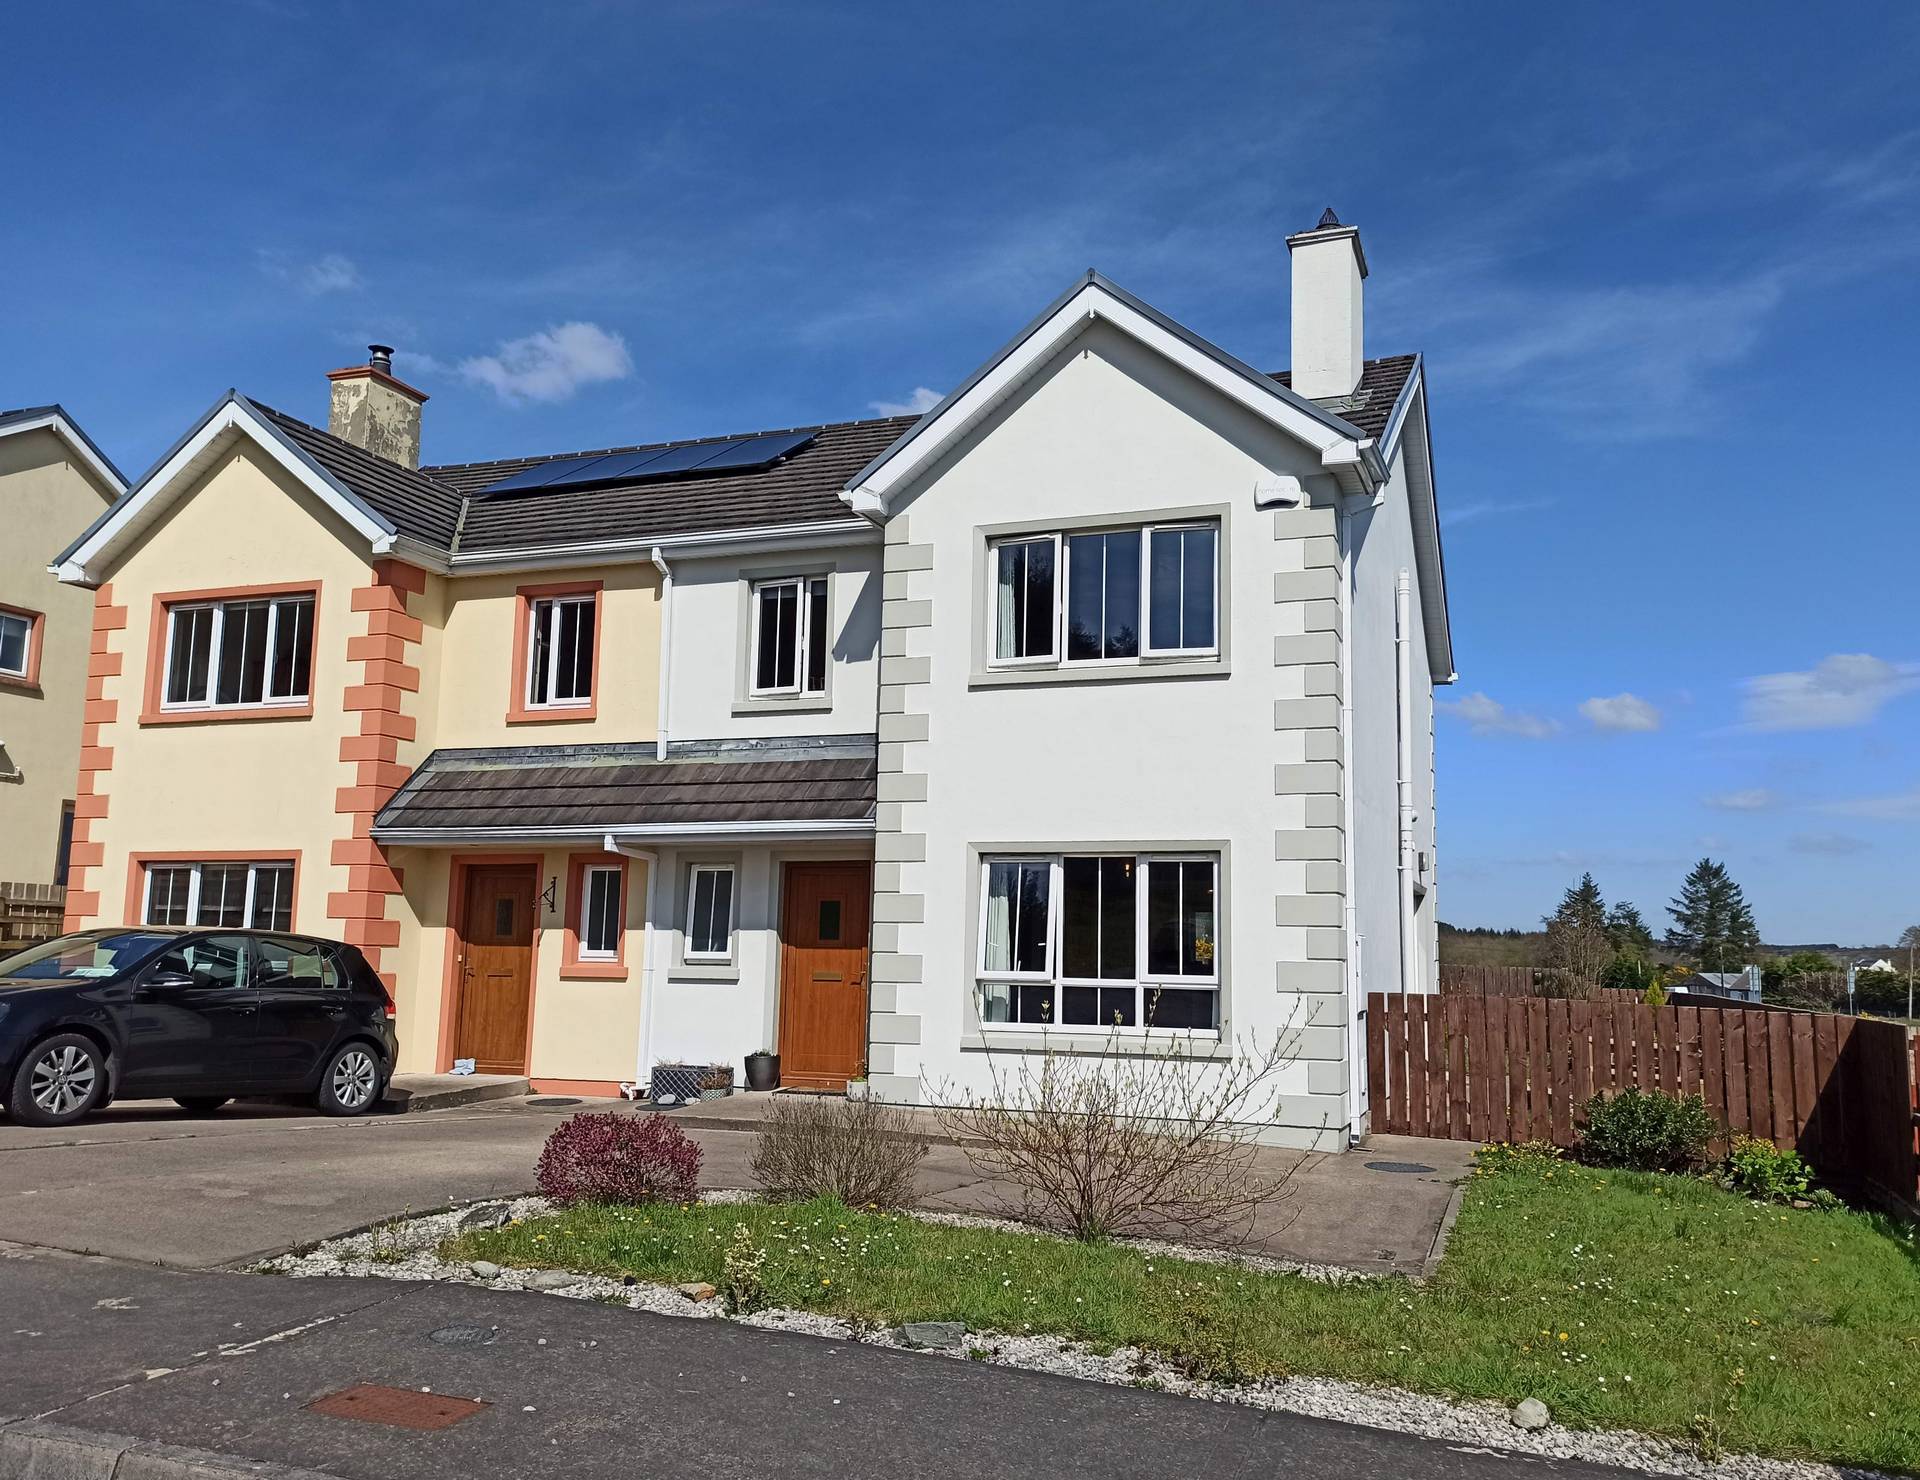 16 Radharc Na Coille,  Drumkeen, Co. Donegal, F93 P2Y6